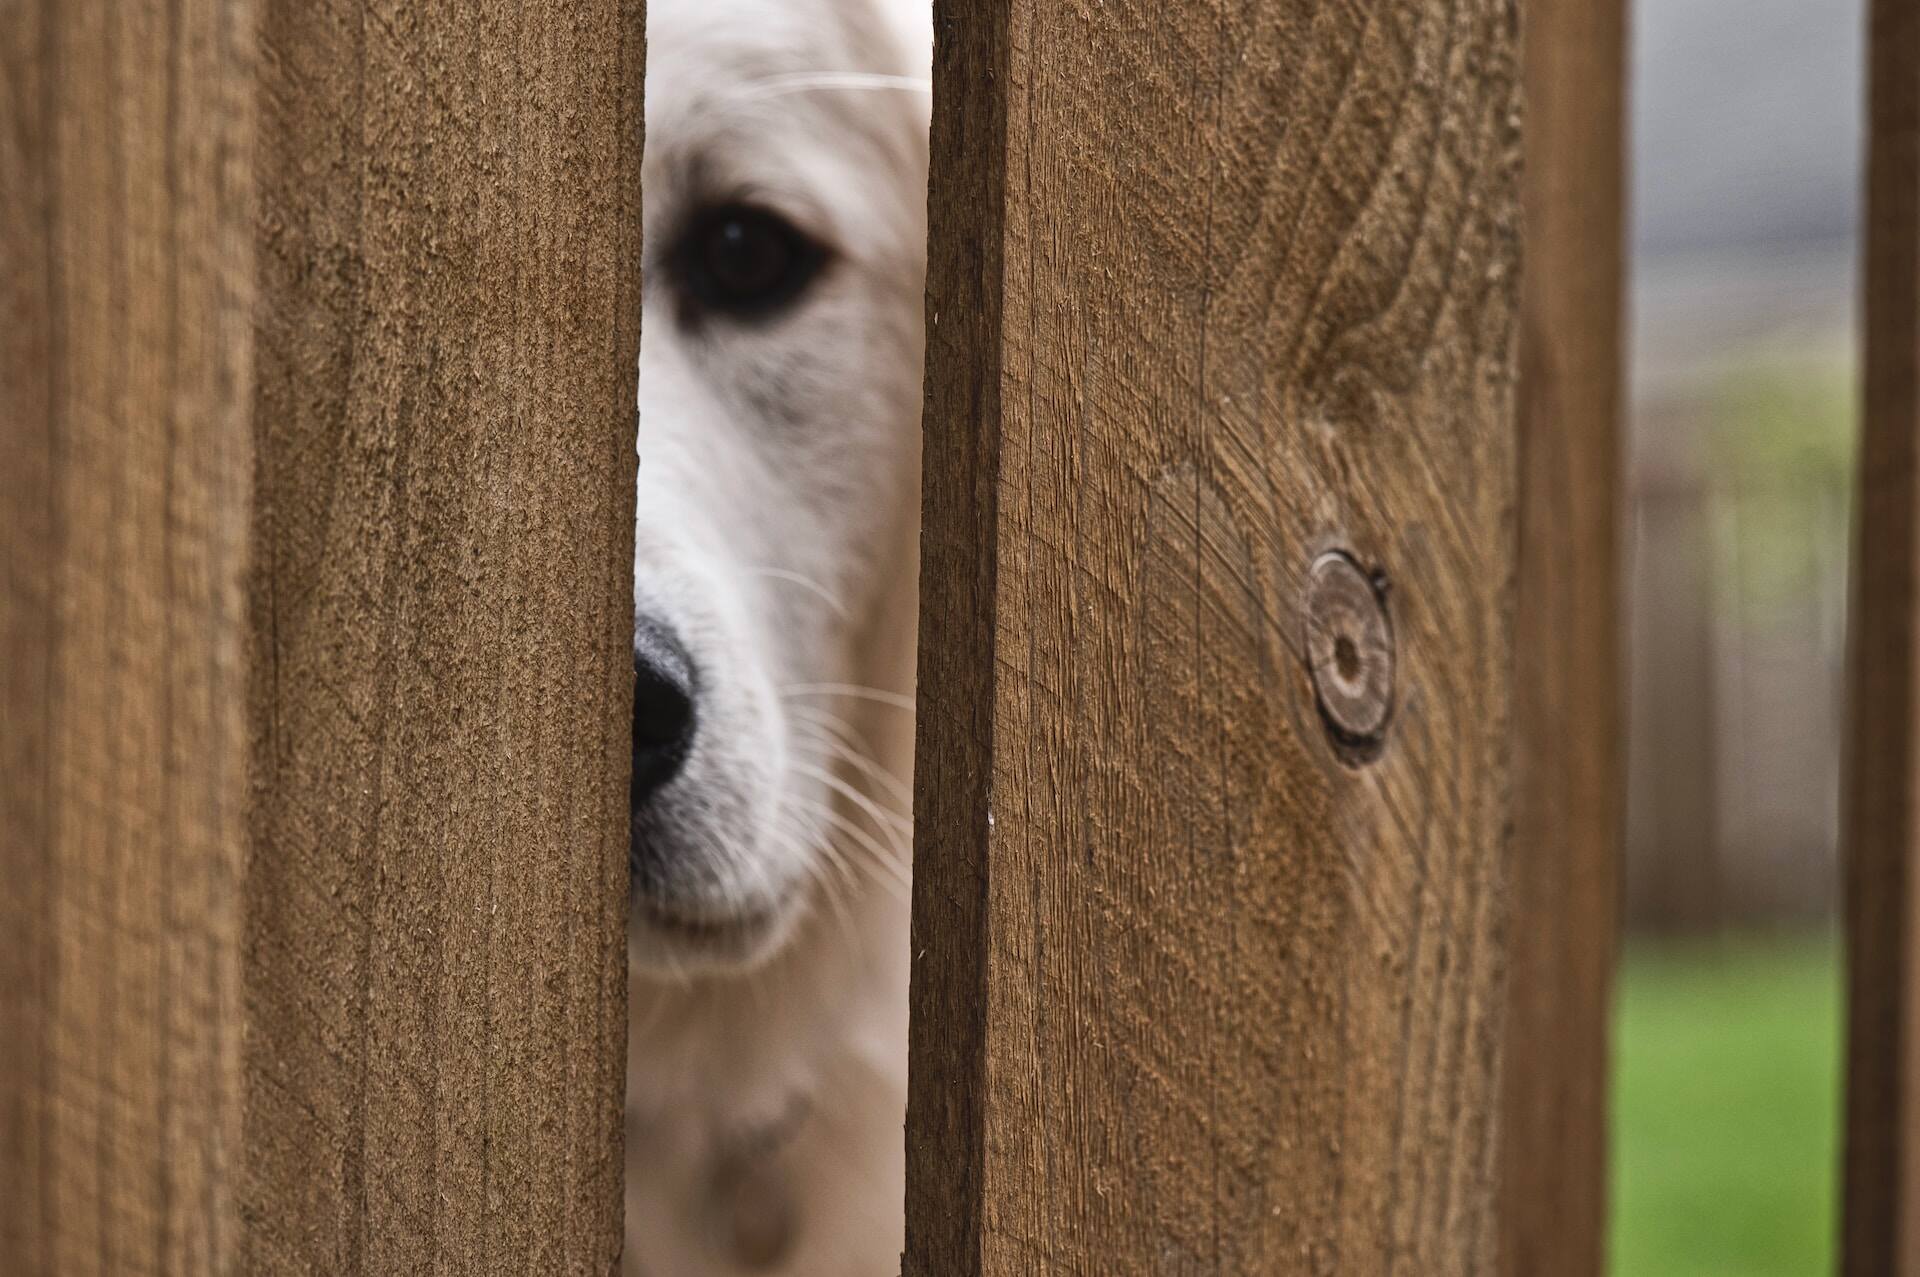 A dog peers through the wooden slats of a fence